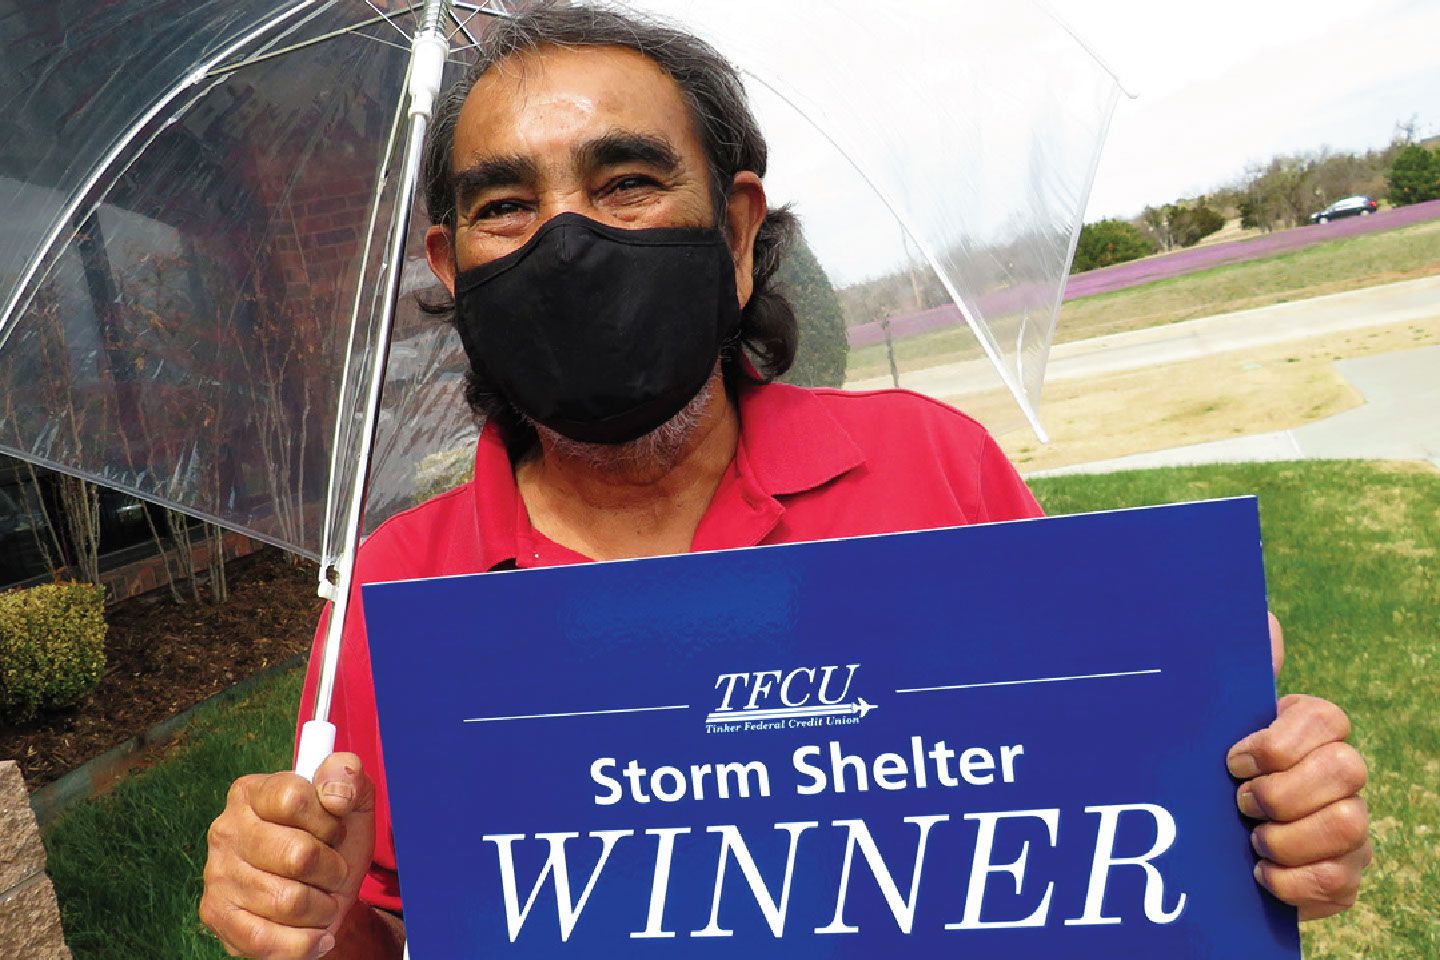 A man in a mask holding an umbrella and a sign